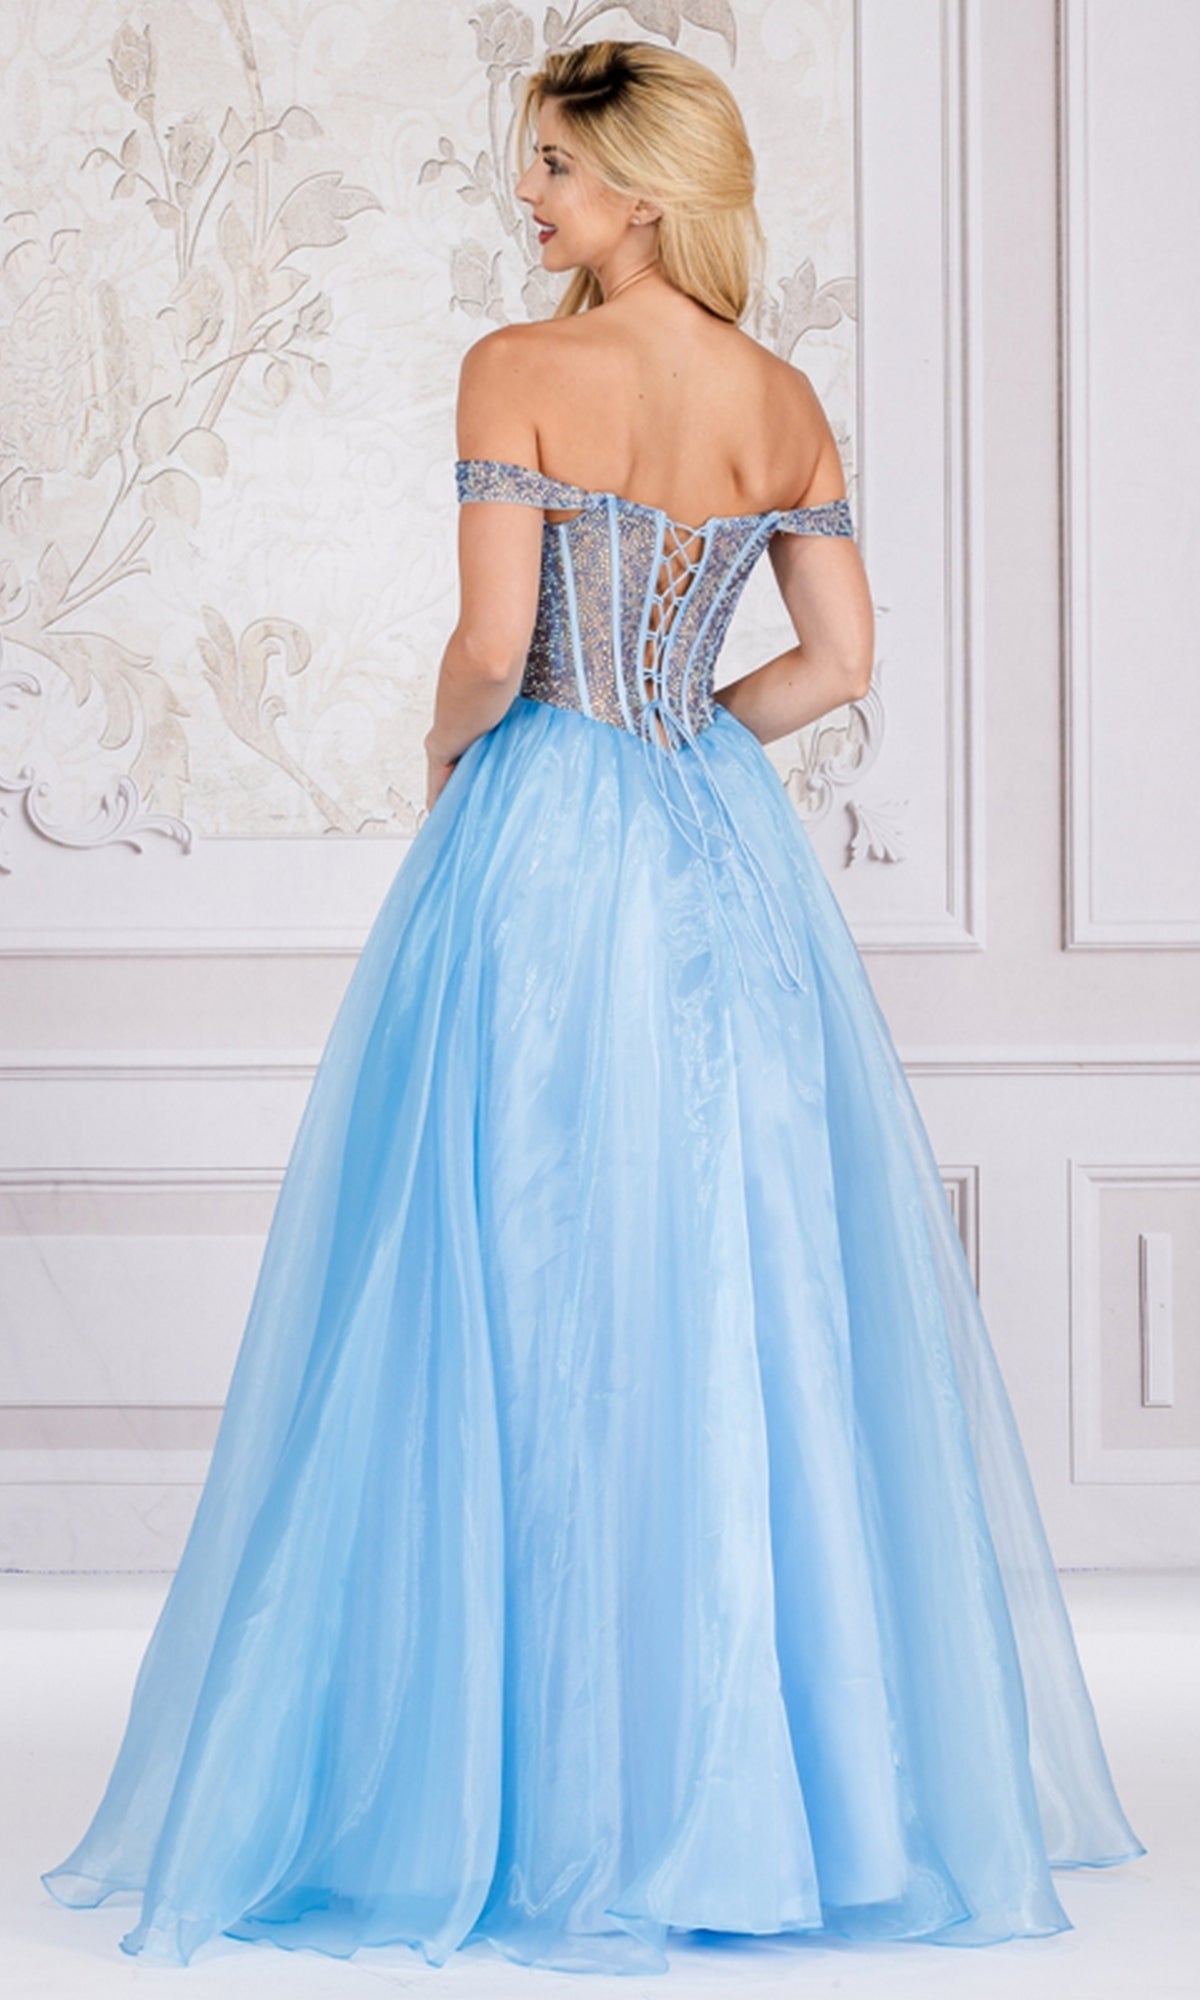 Organza Off-Shoulder Bodice Prom Ball Gown 7040